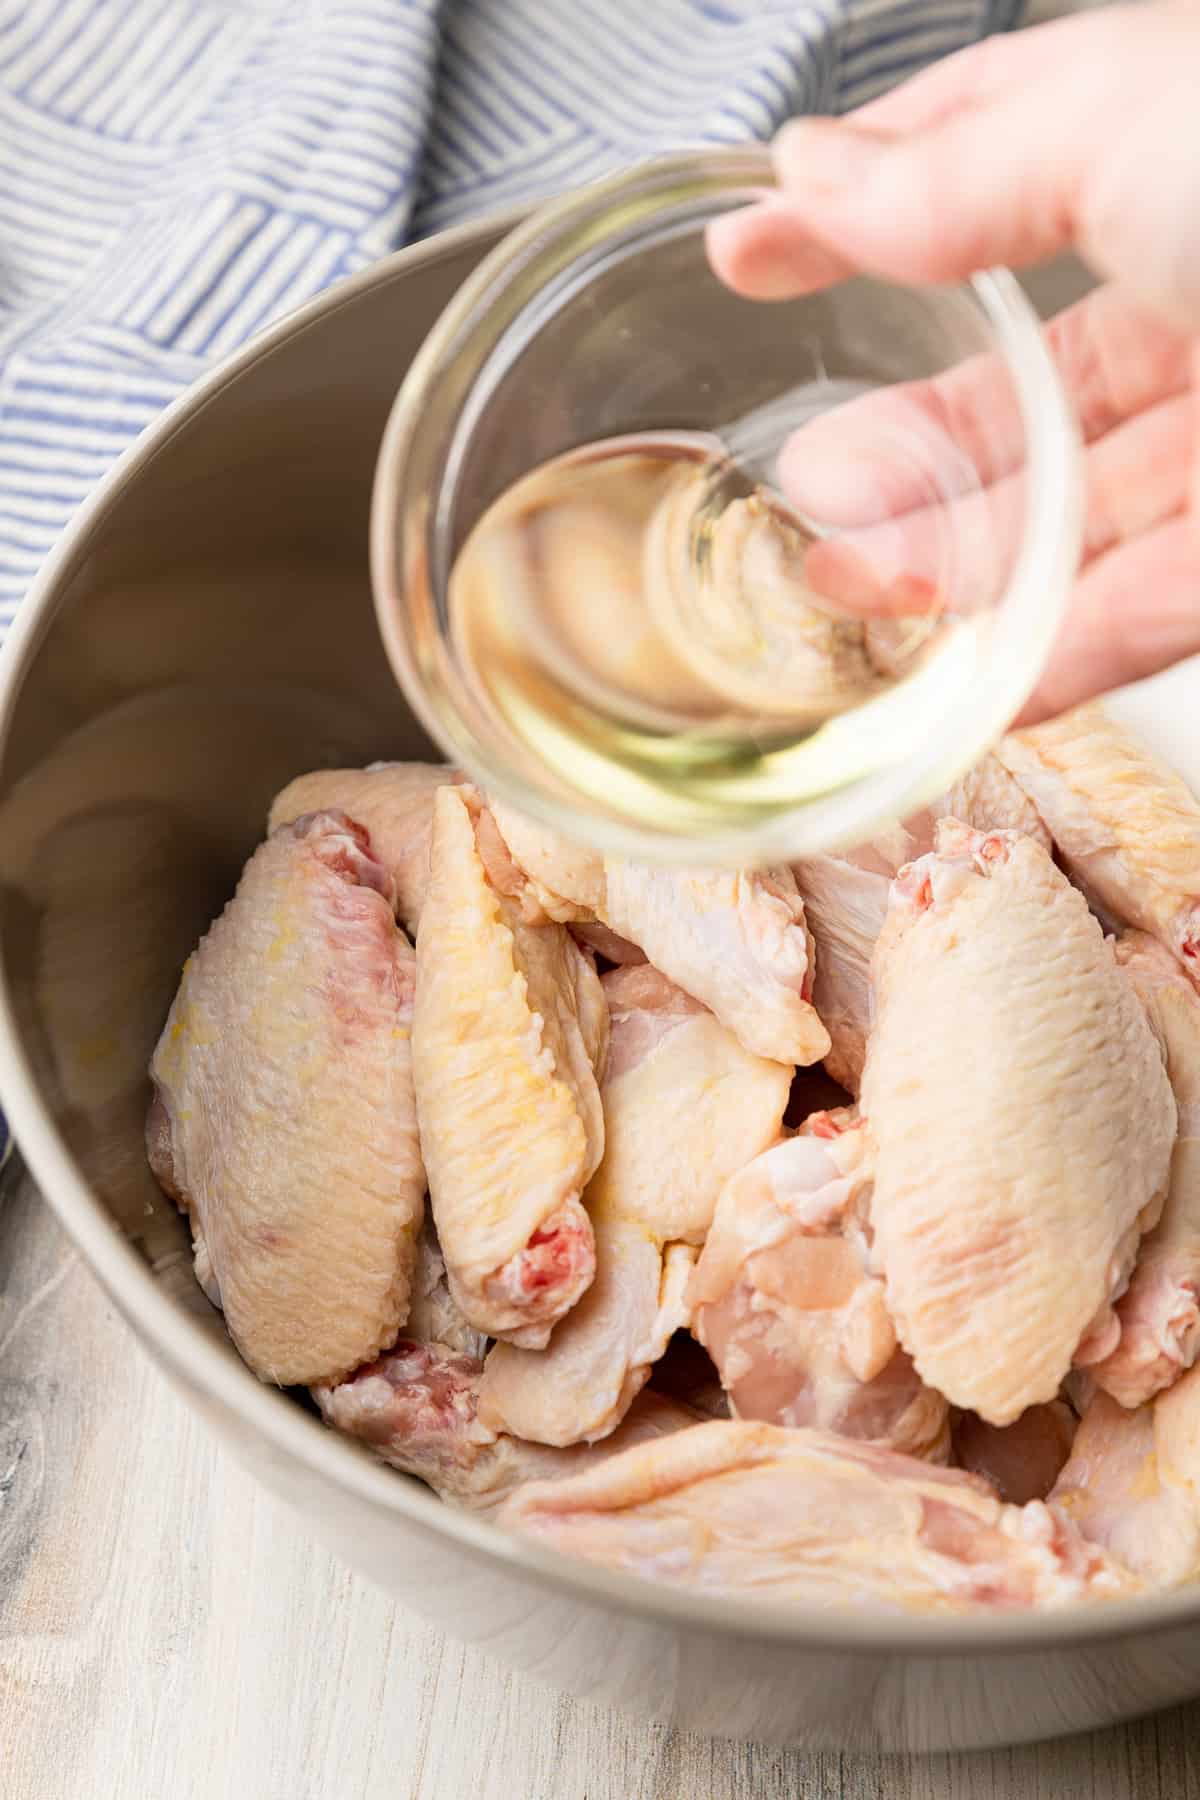 add oil to a bowl of raw chicken wings